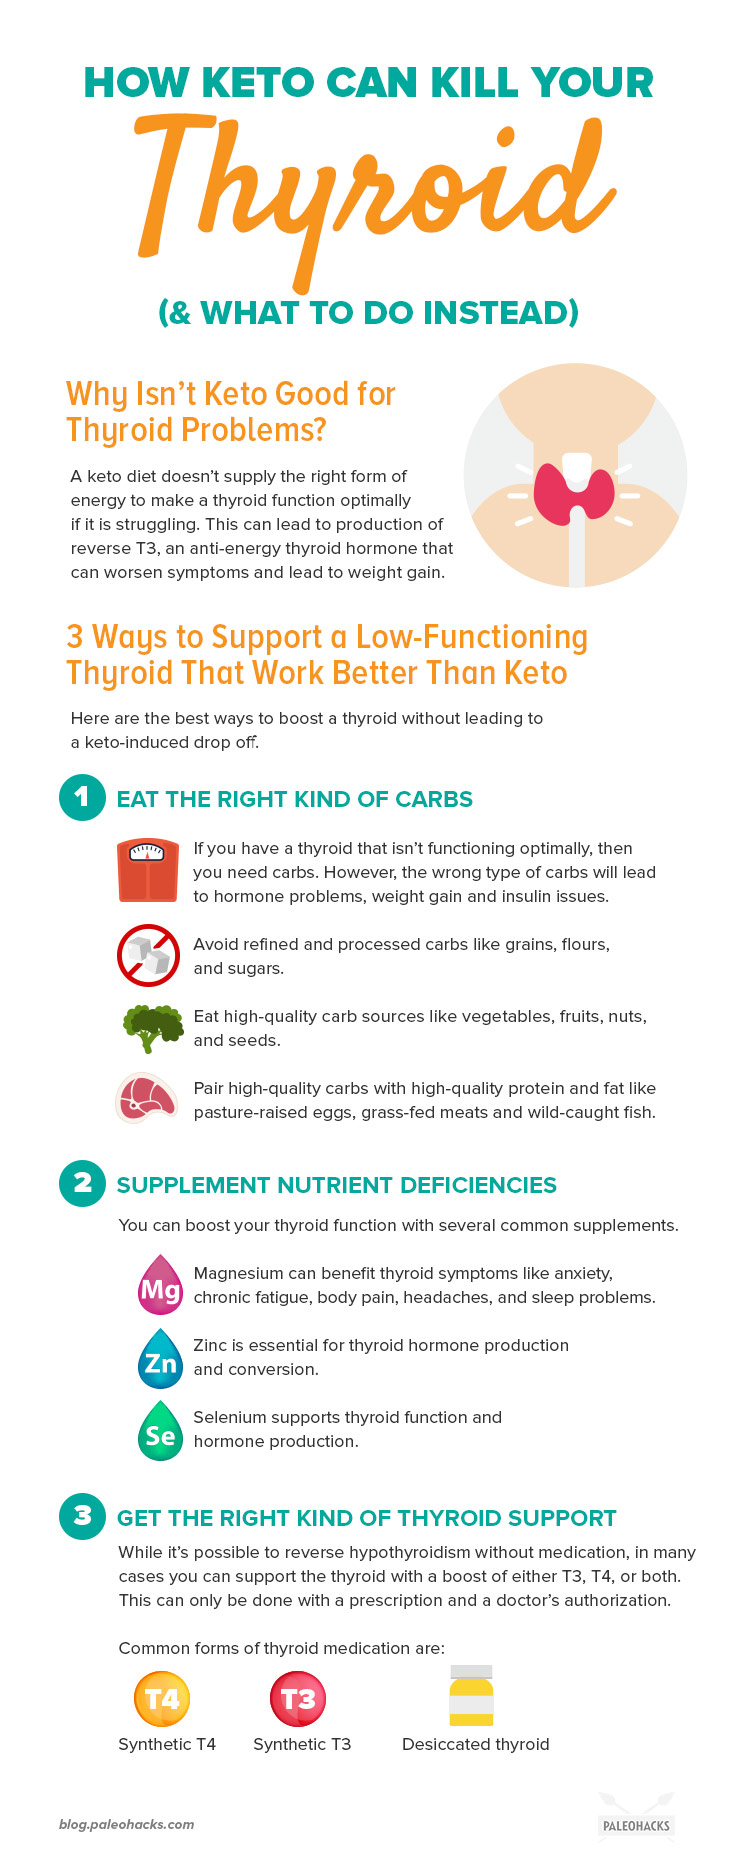 Thyroid problems require specific nutrient and dietary intervention to rebalance, and it’s not as simple as cutting carbs or getting on medication.